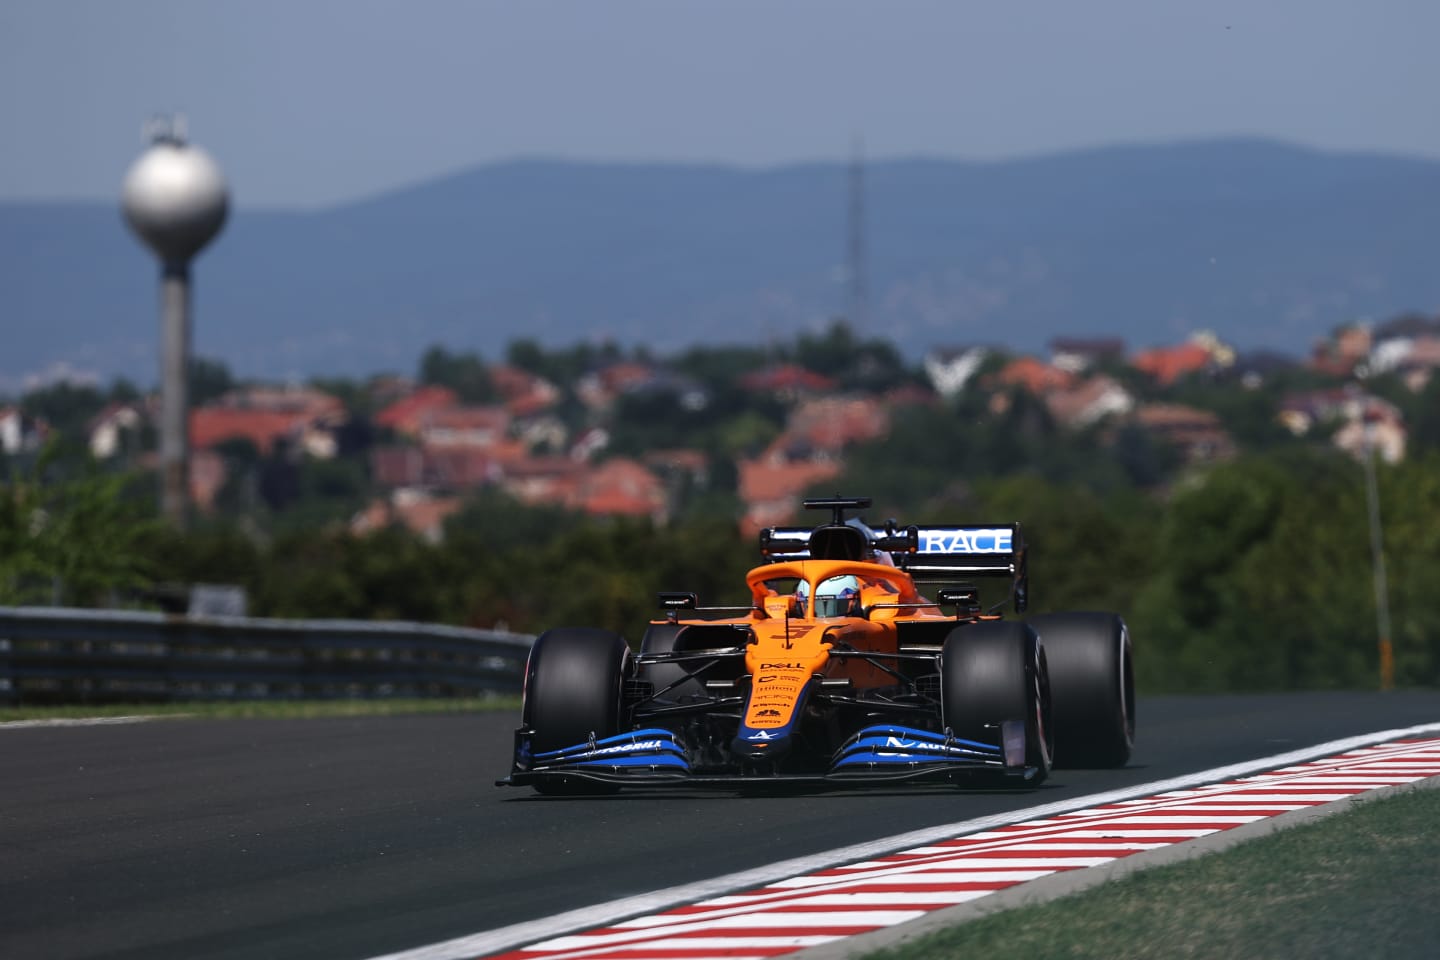 BUDAPEST, HUNGARY - JULY 30: Daniel Ricciardo of Australia driving the (3) McLaren F1 Team MCL35M Mercedes during practice ahead of the F1 Grand Prix of Hungary at Hungaroring on July 30, 2021 in Budapest, Hungary. (Photo by Lars Baron/Getty Images)